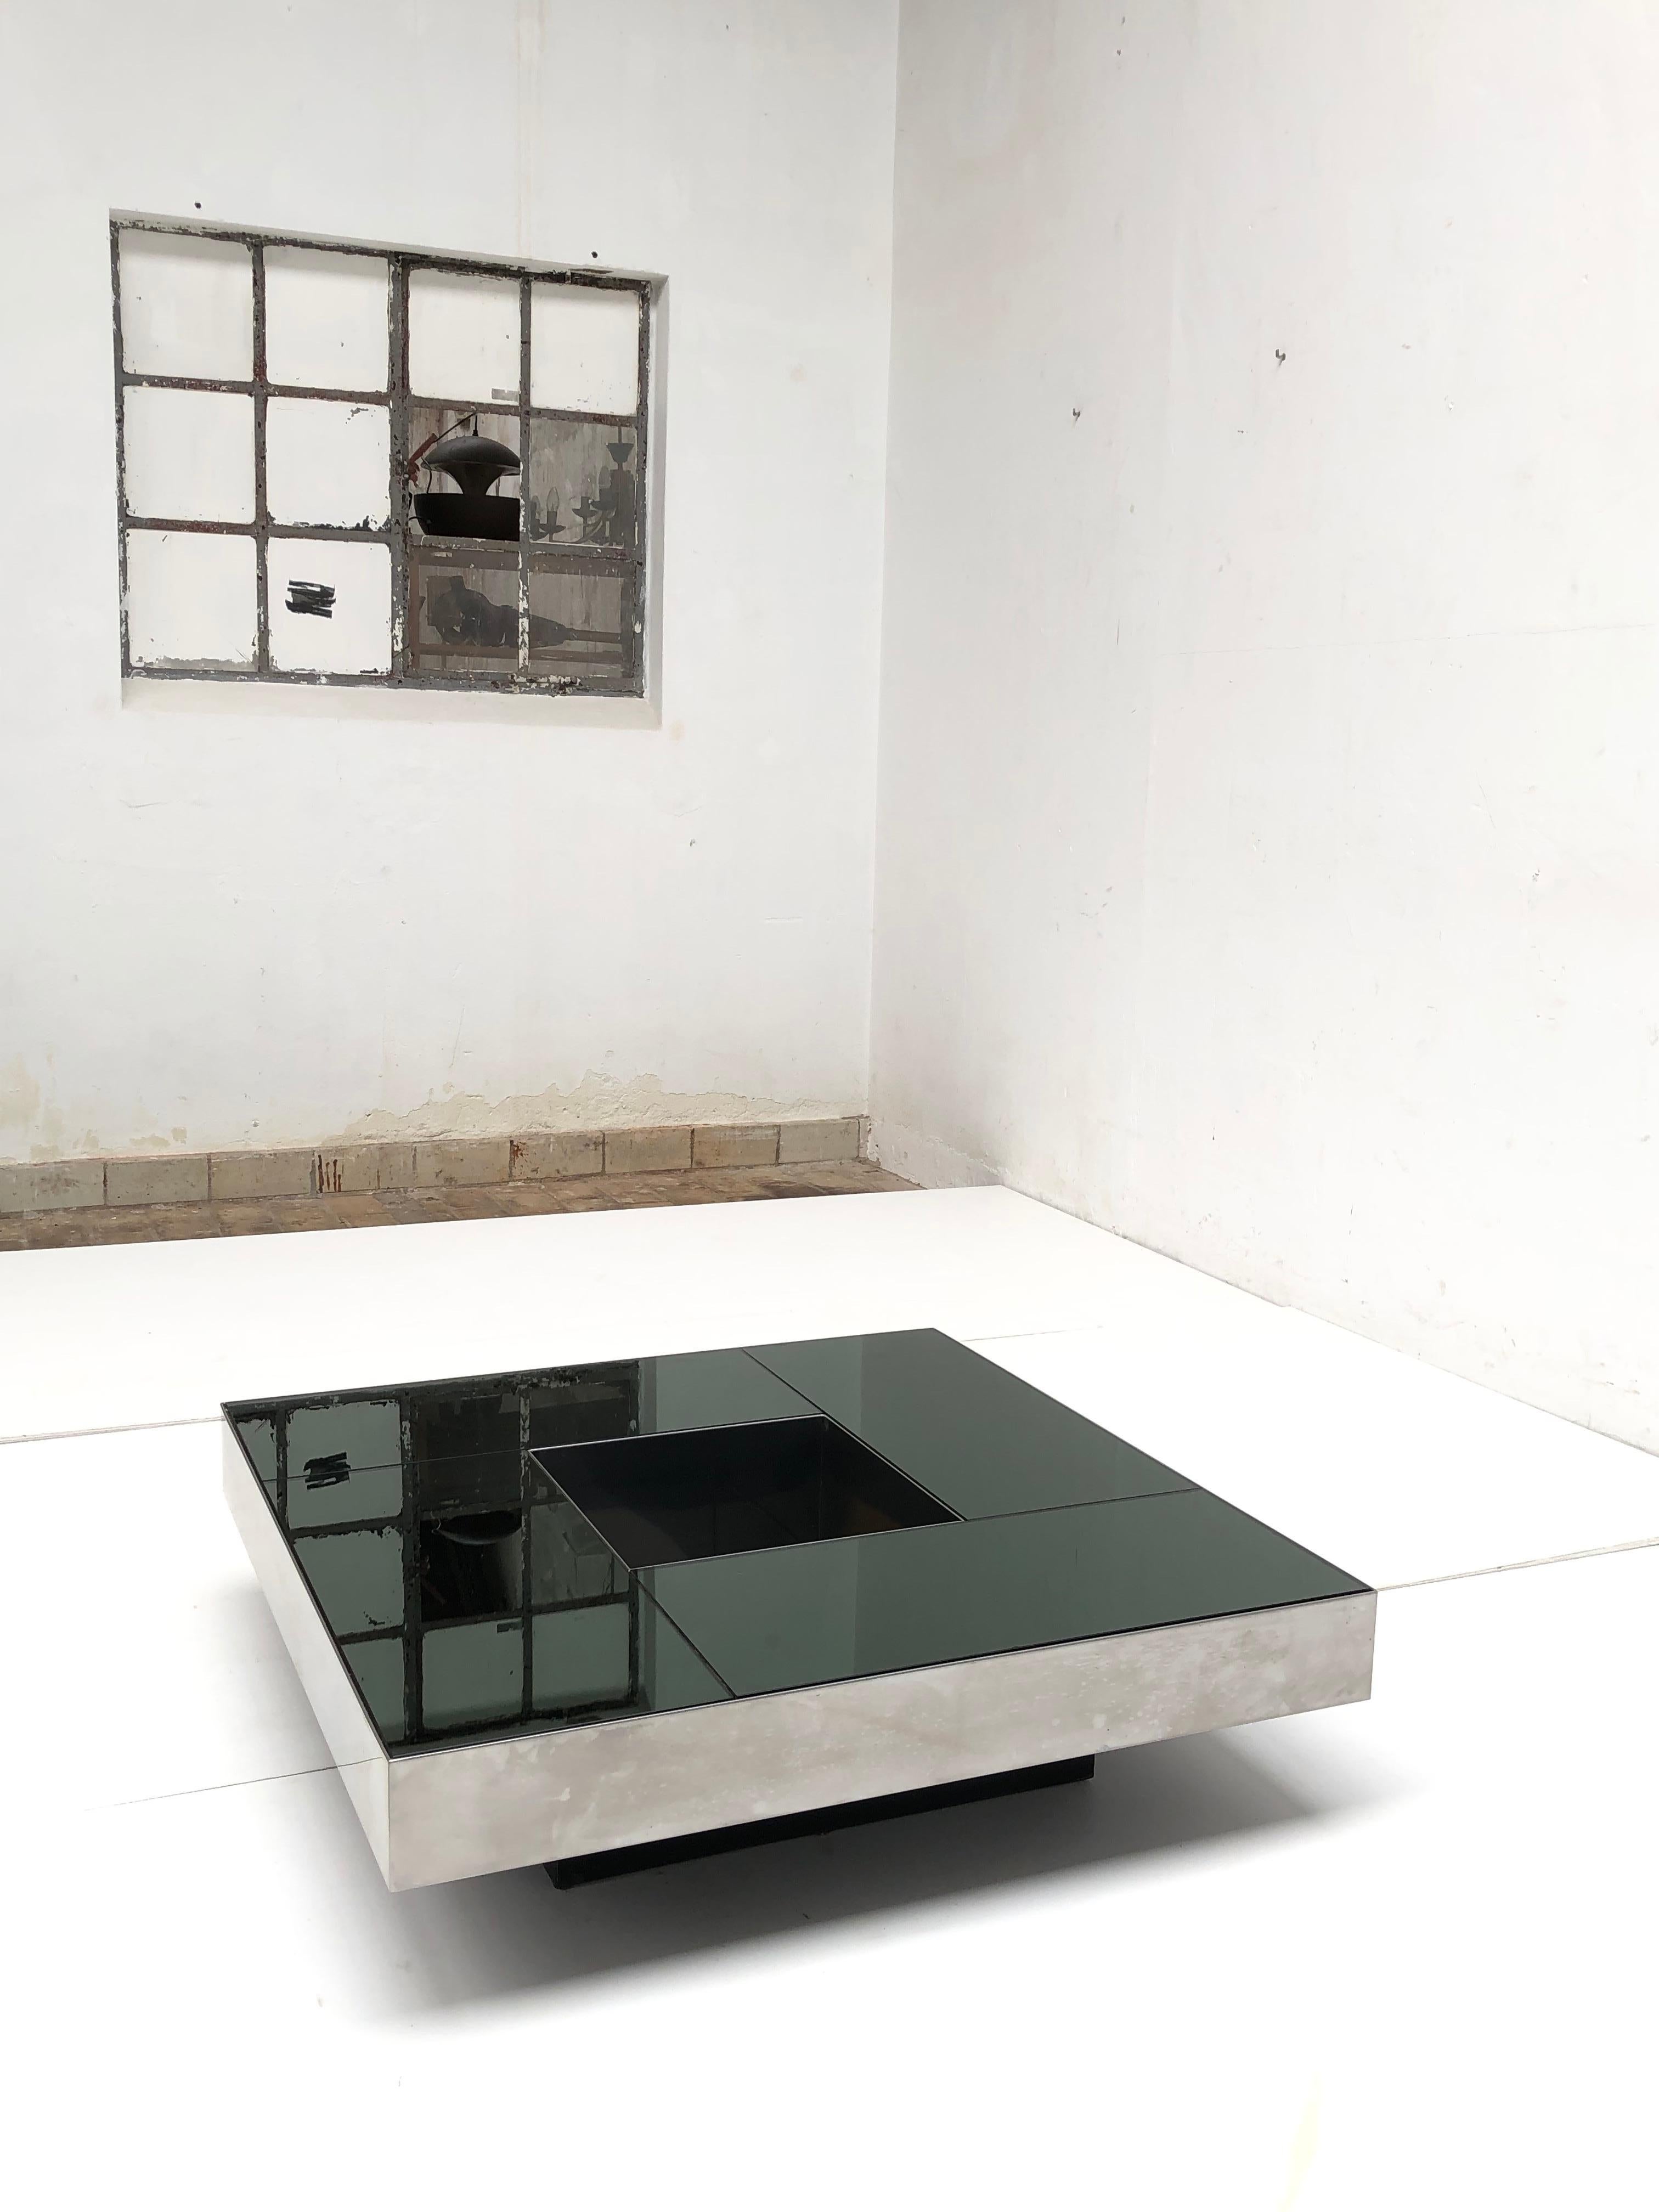 “Shillings” table by Italian designers Ausenda, Baldo Grossi and Gavioli

Produced in 1970 by NY FORM in Bologna Italy 

 Superb stainless steel table with smoked mirror top

Very Zen when you display a trailing plant or organic driftwood form